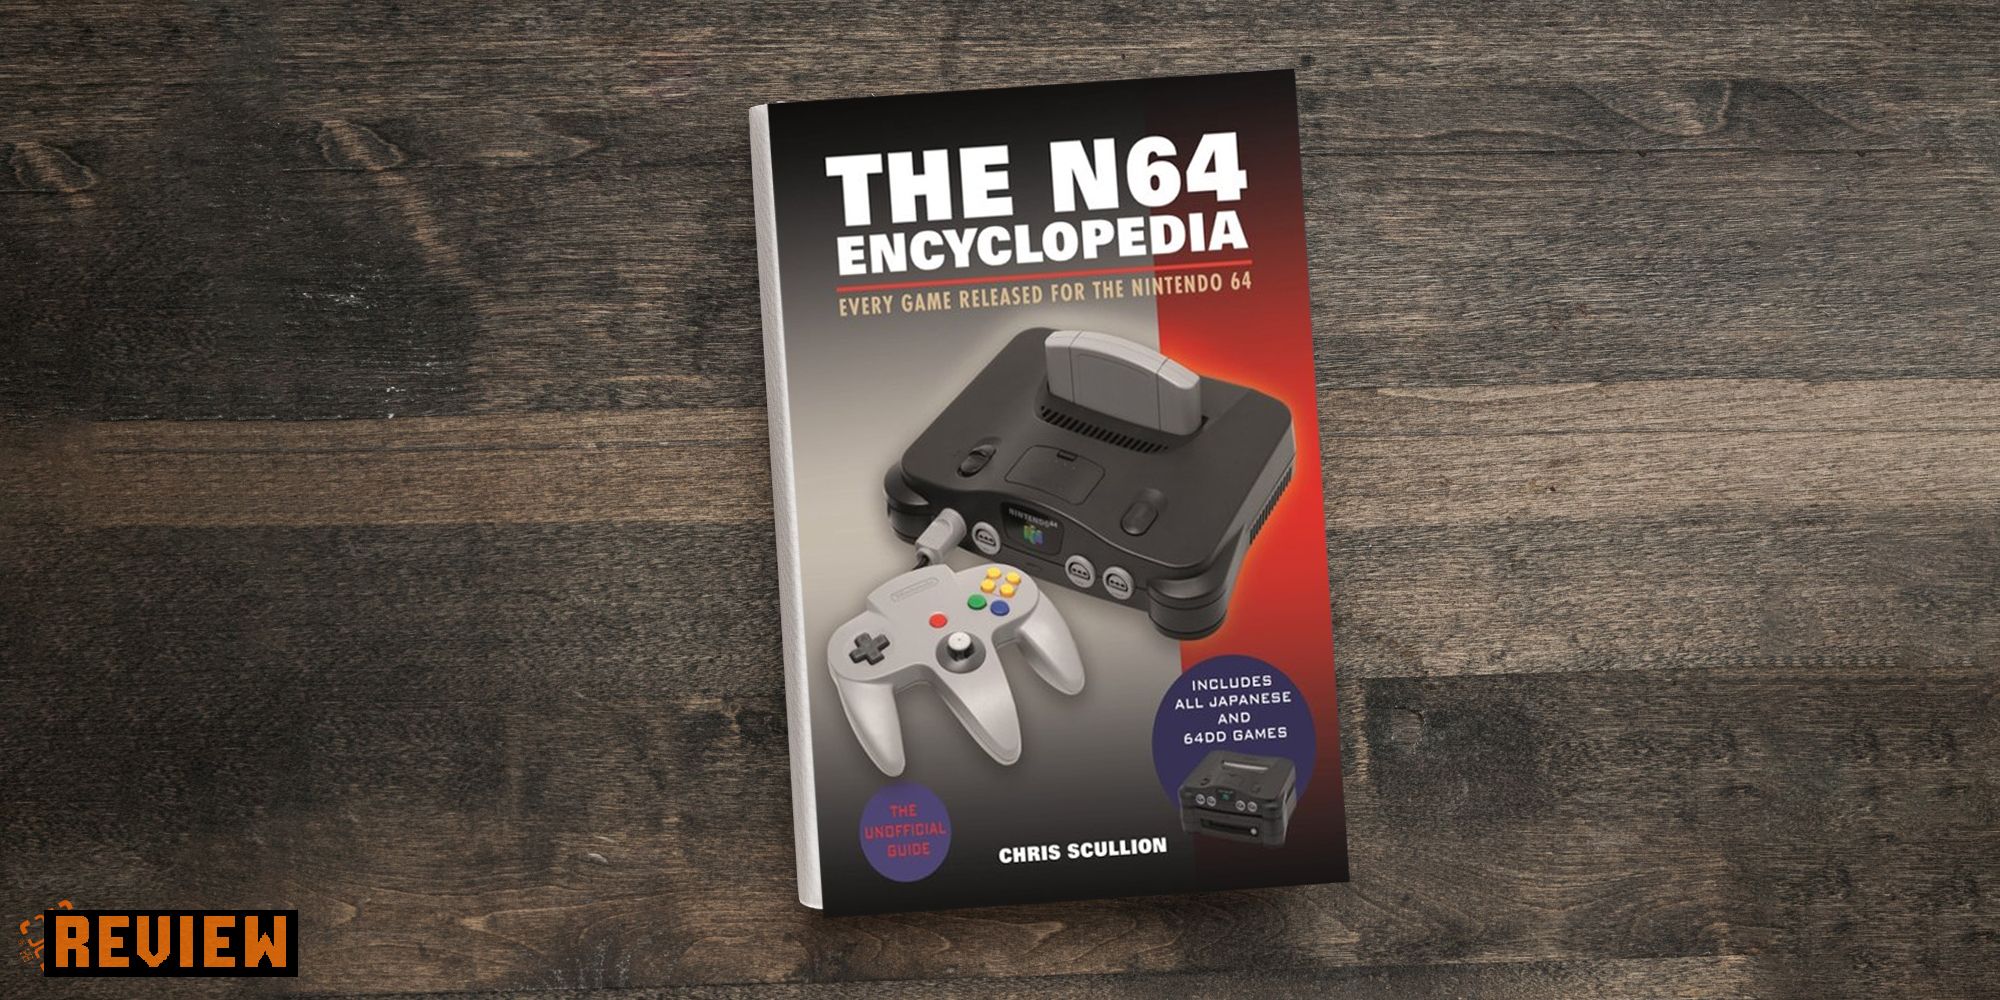 The N64 Encyclopedia cover against a gray wood panel background